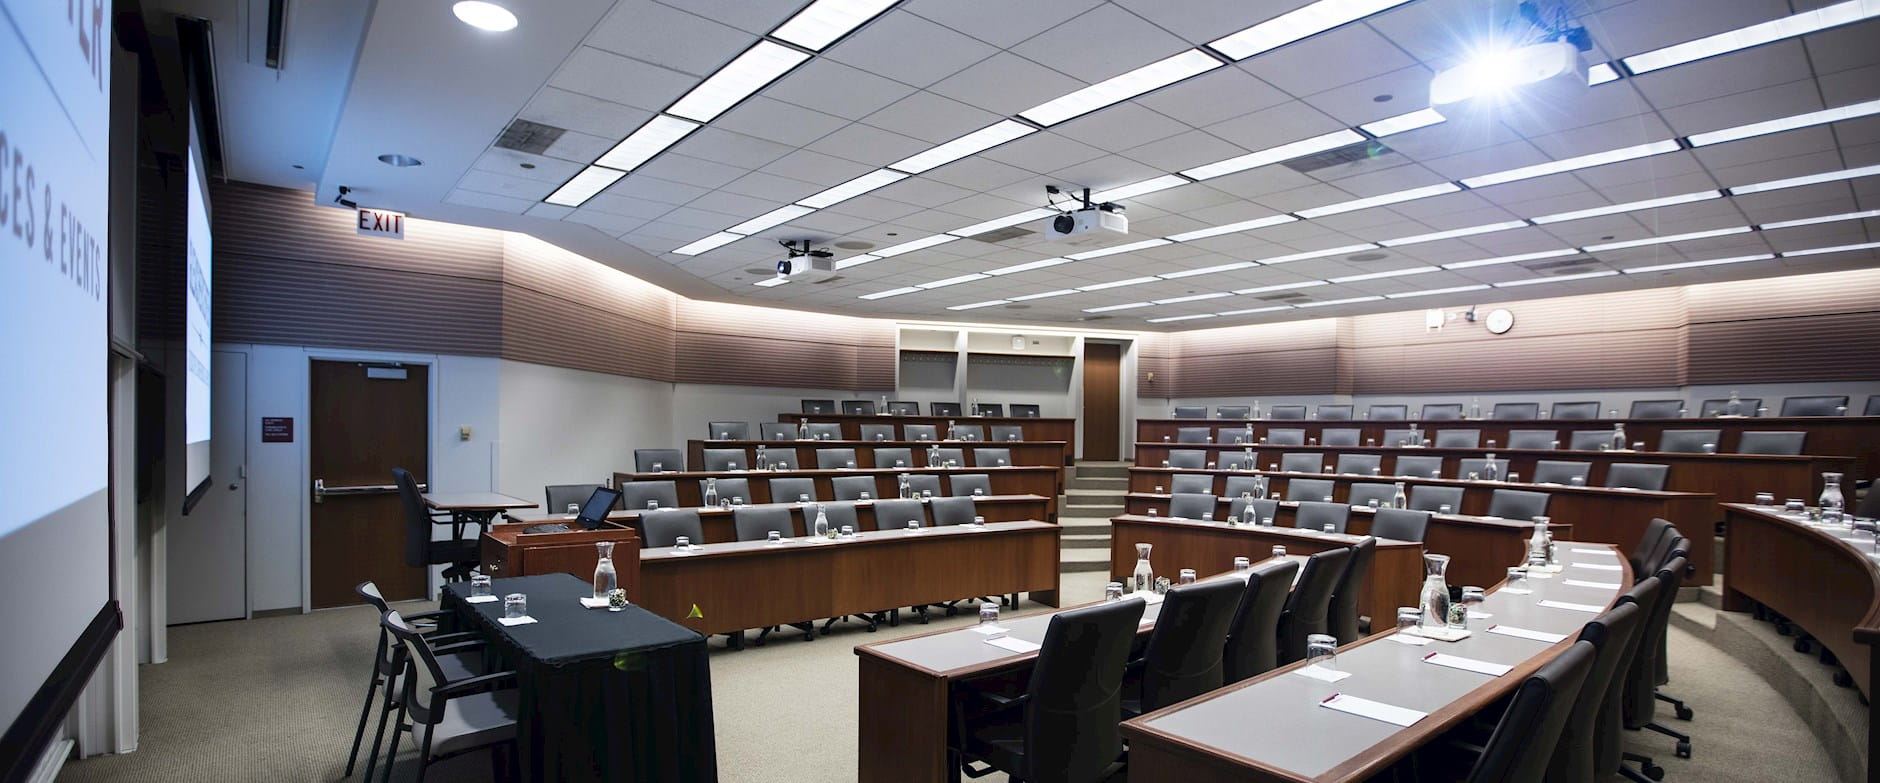 A wide view from the front-left of meeting room 400 at the Gleacher Center looking at tiered tables and chairs in a semi-circle; a projector shines brightly from the ceiling